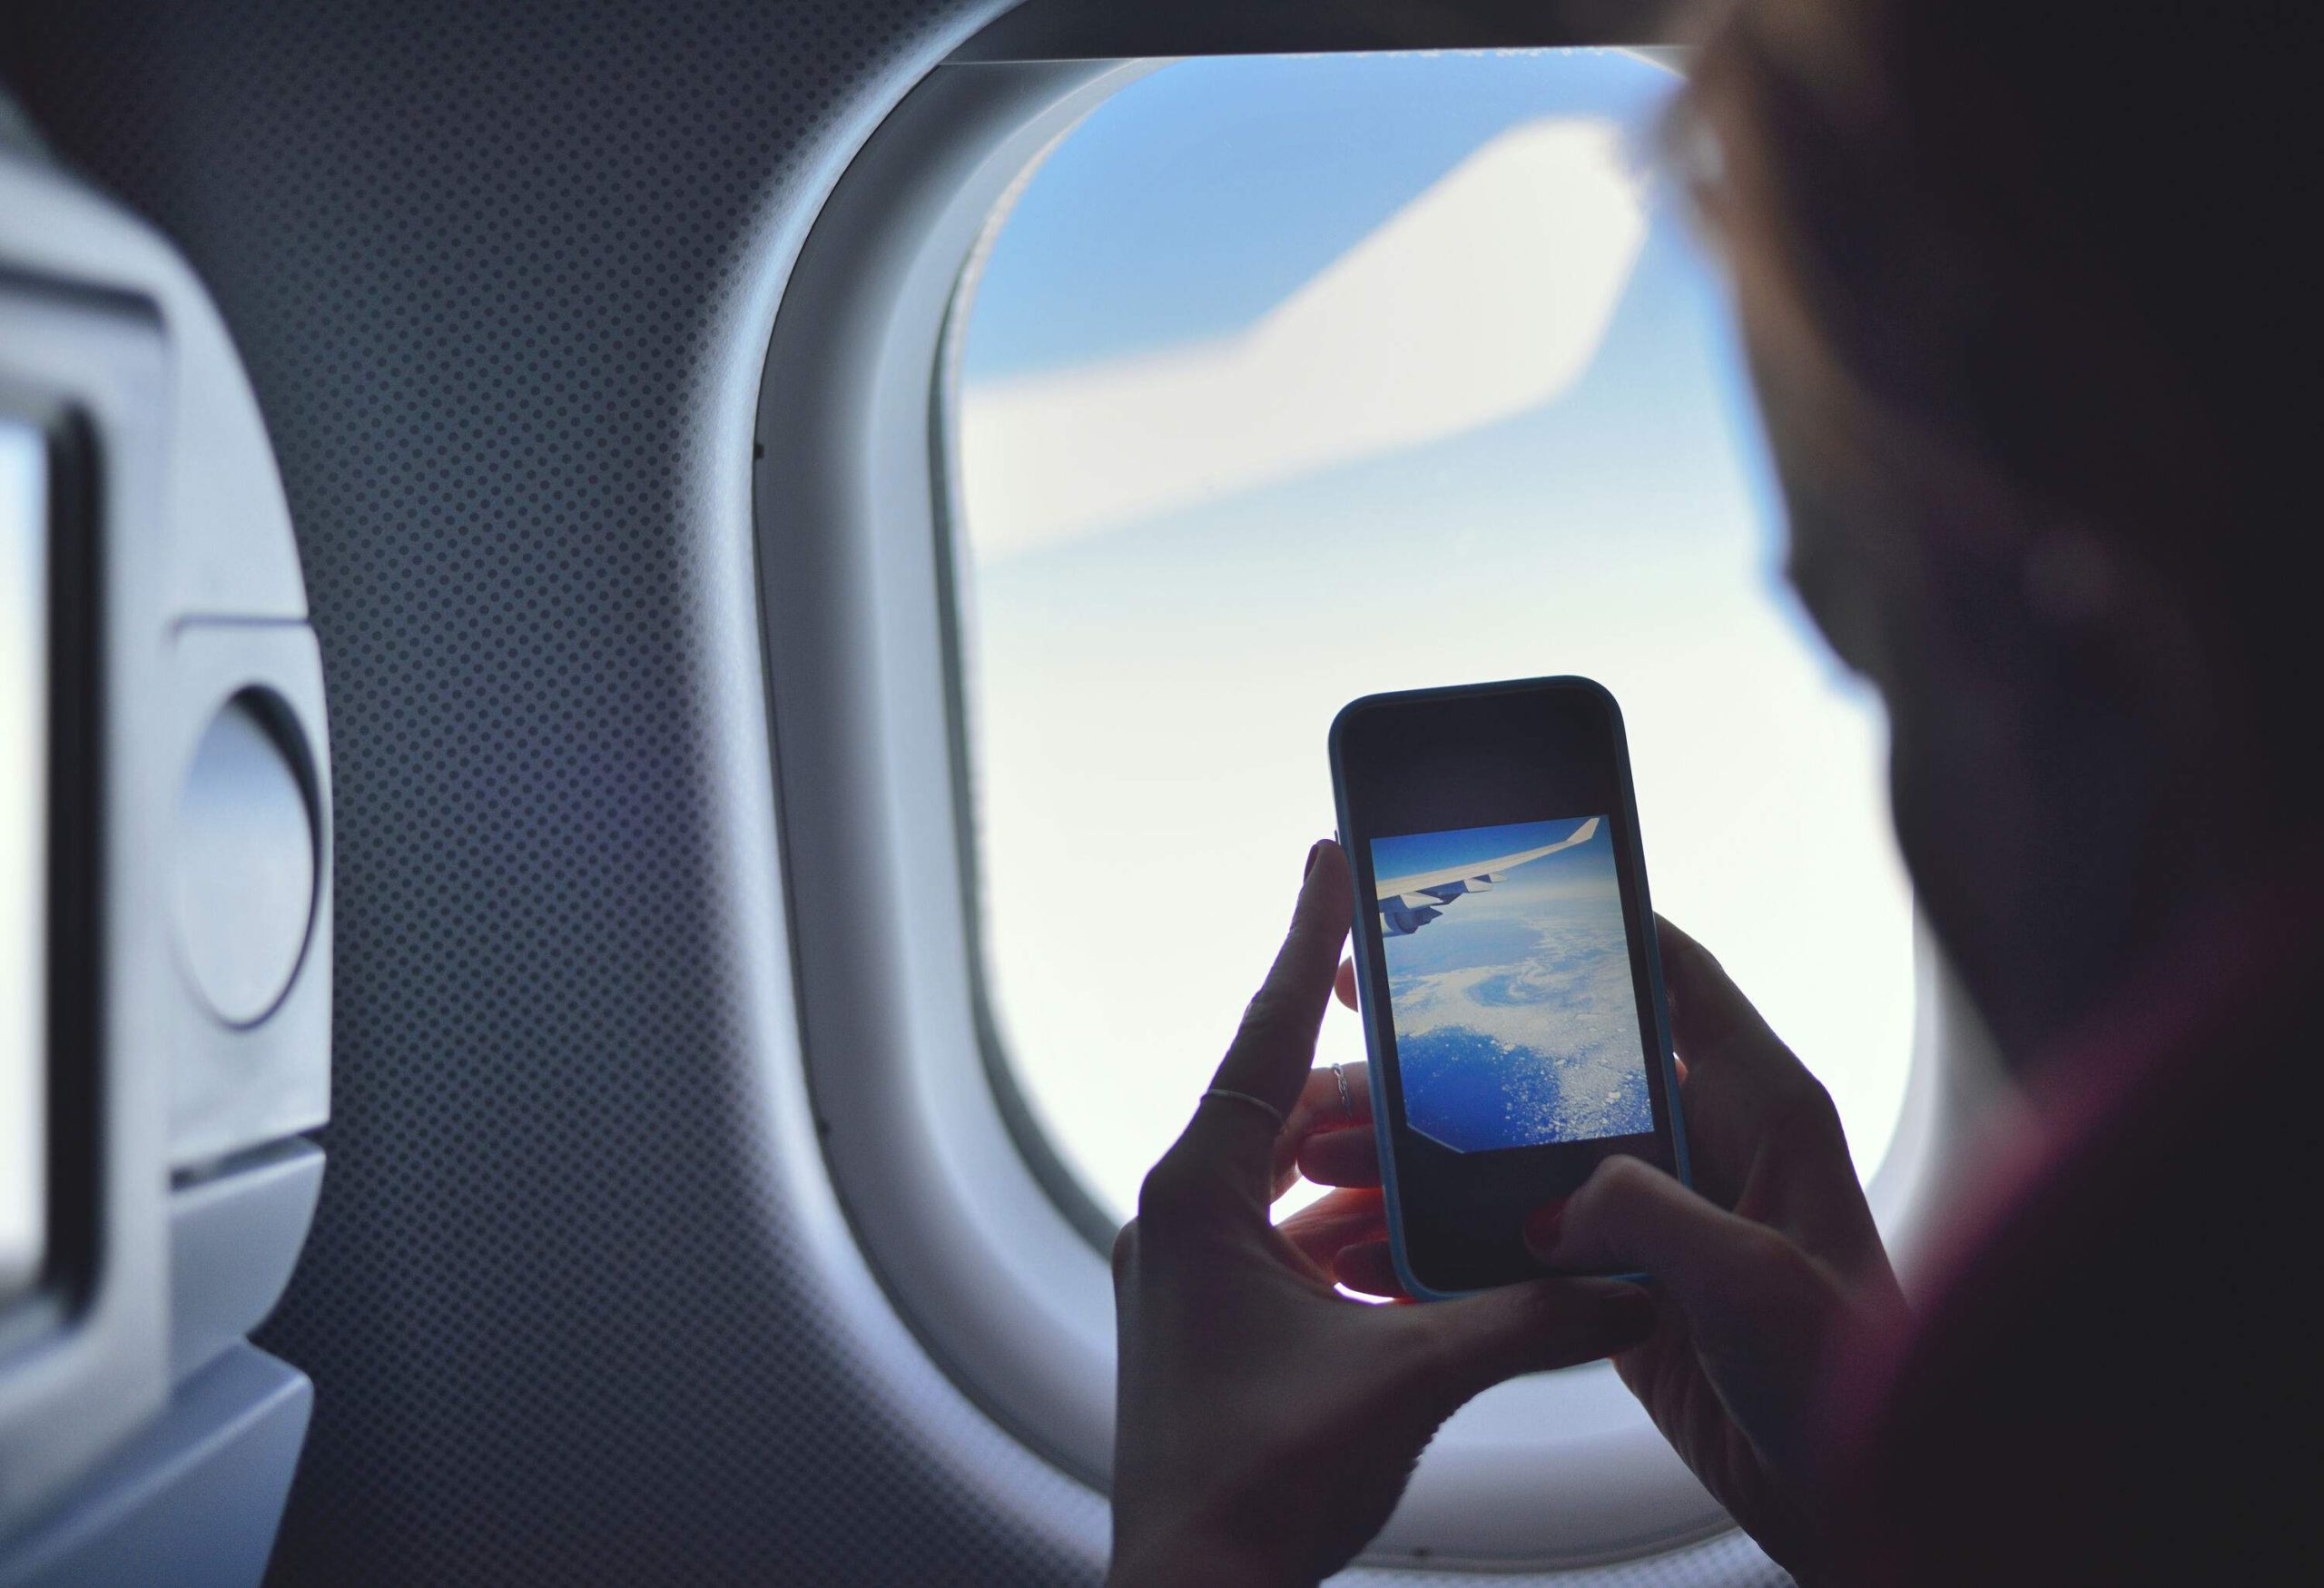 A passenger seated inside an aircraft by the window captures a photo of the white clouds using her smartphone.